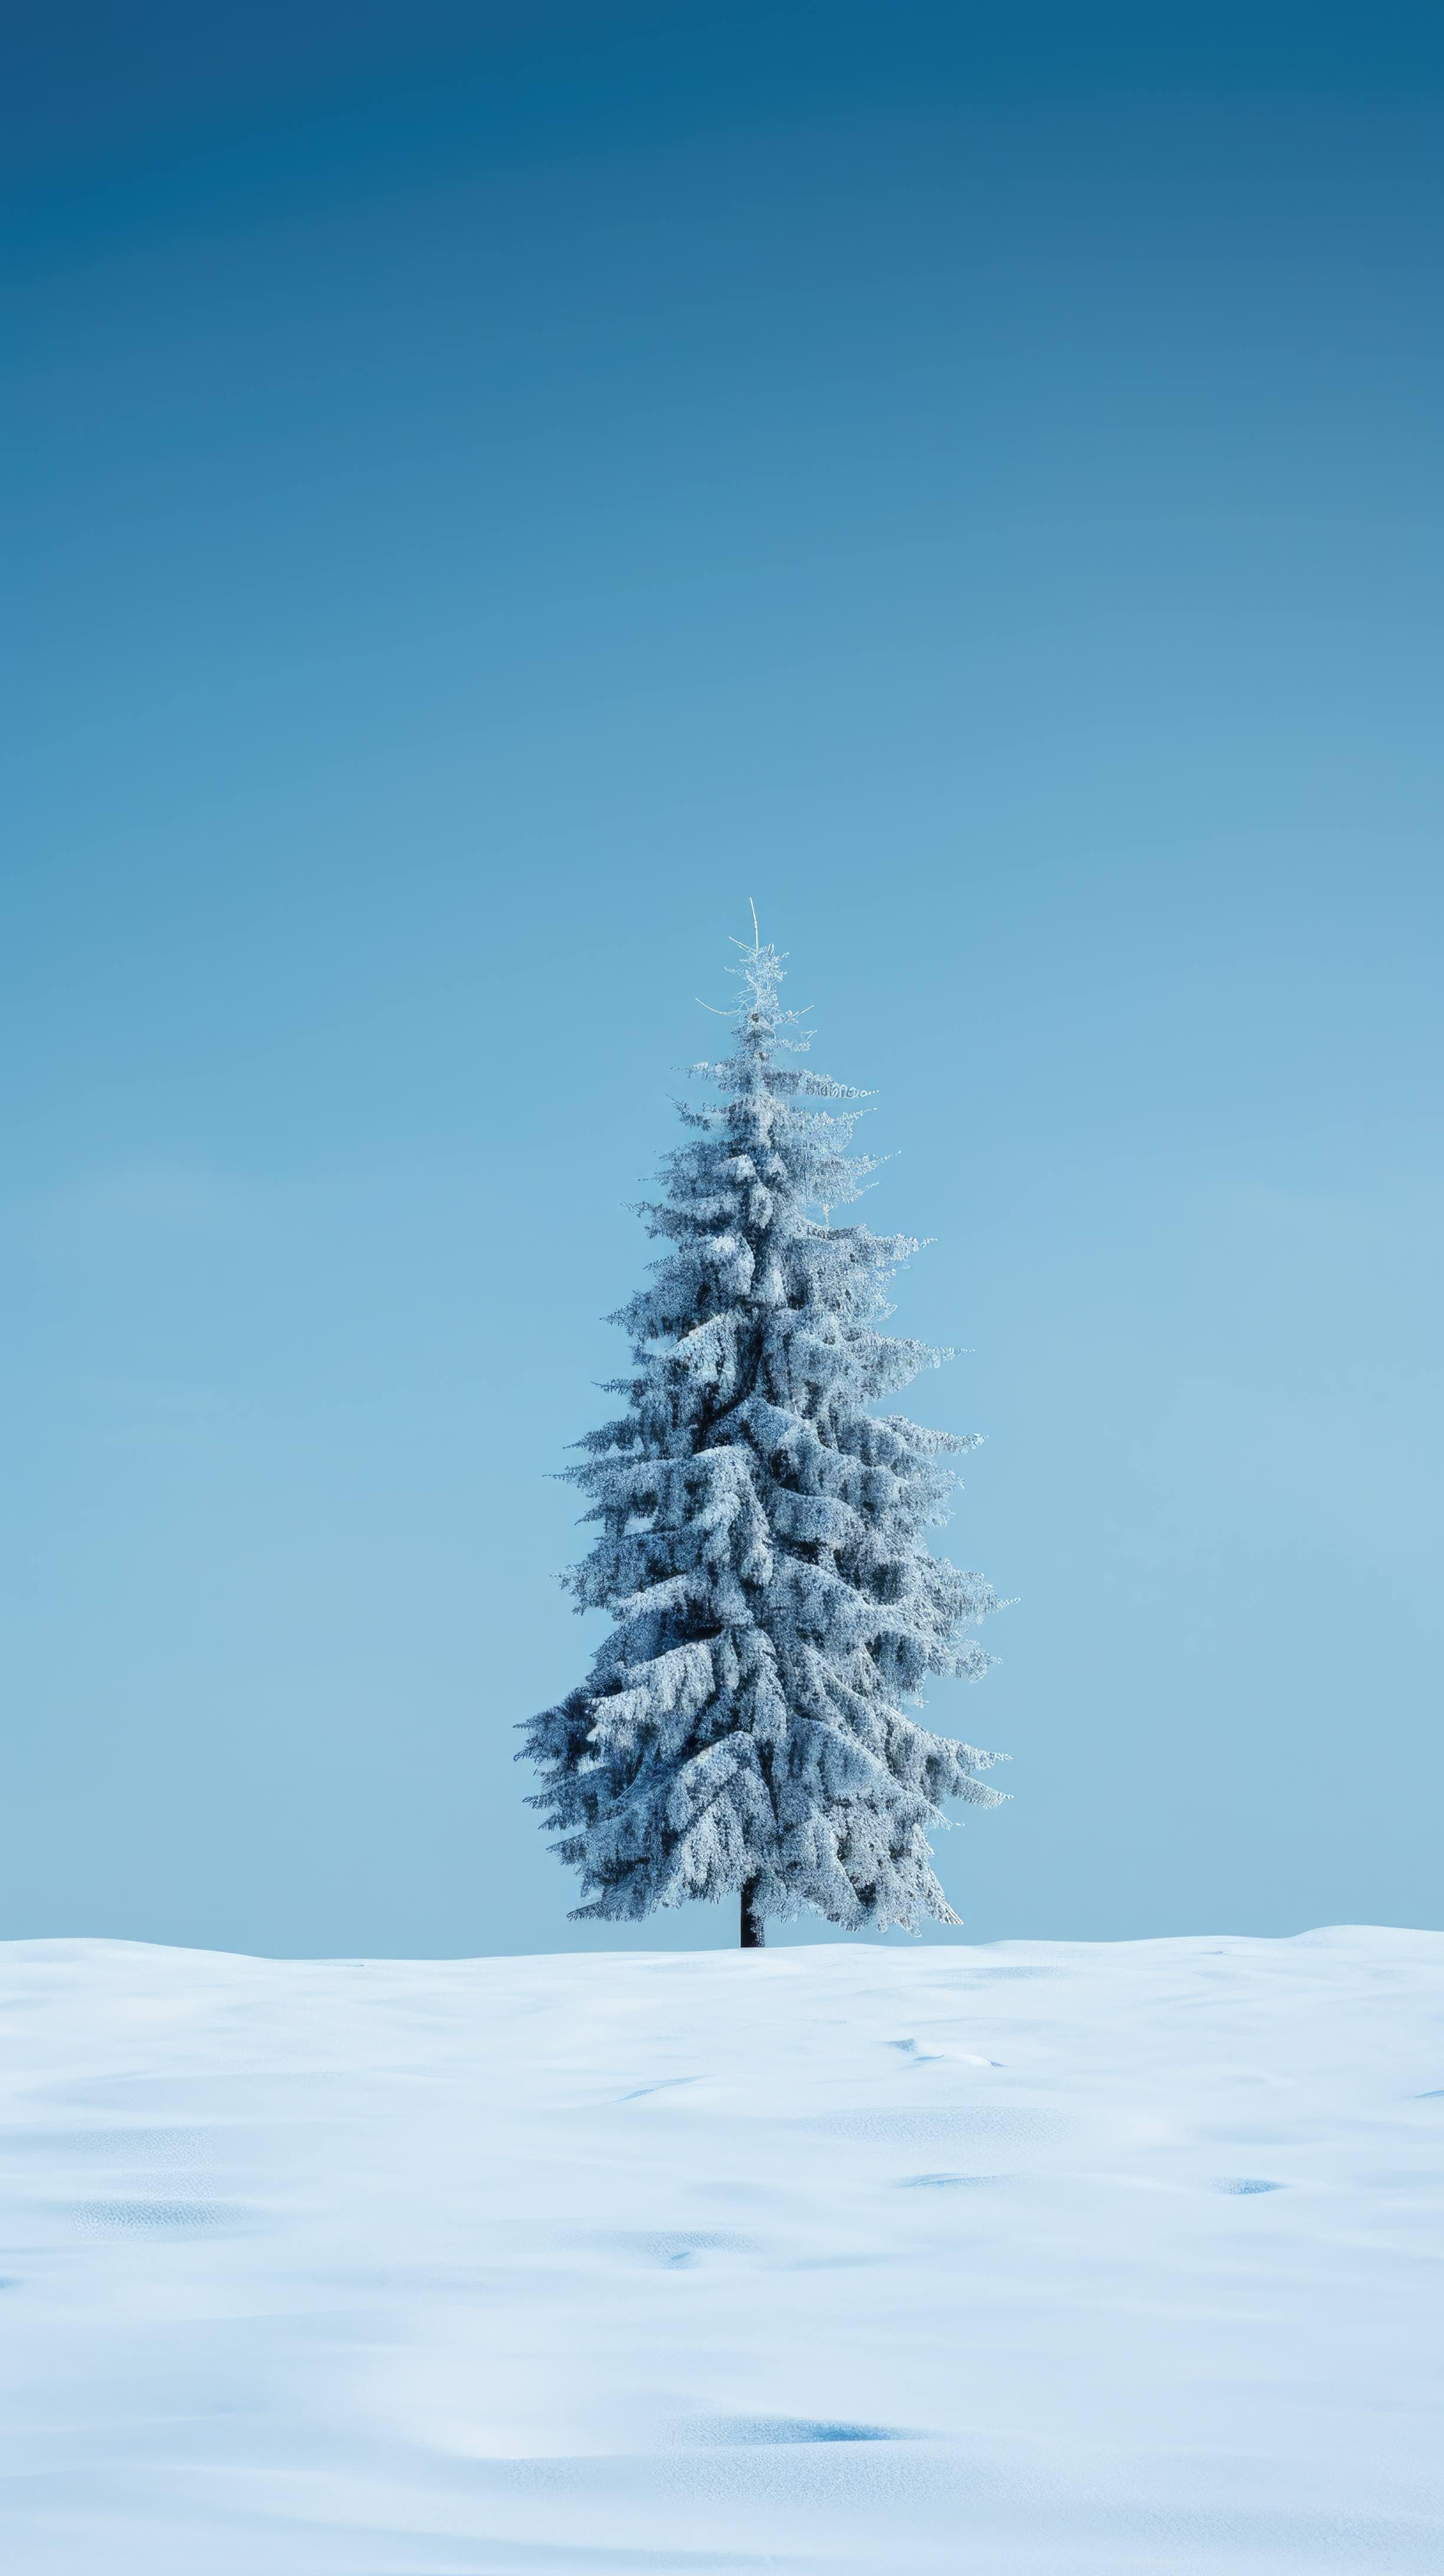 The Outline Of A Snow Covered Fir Tree Stands Prominently On